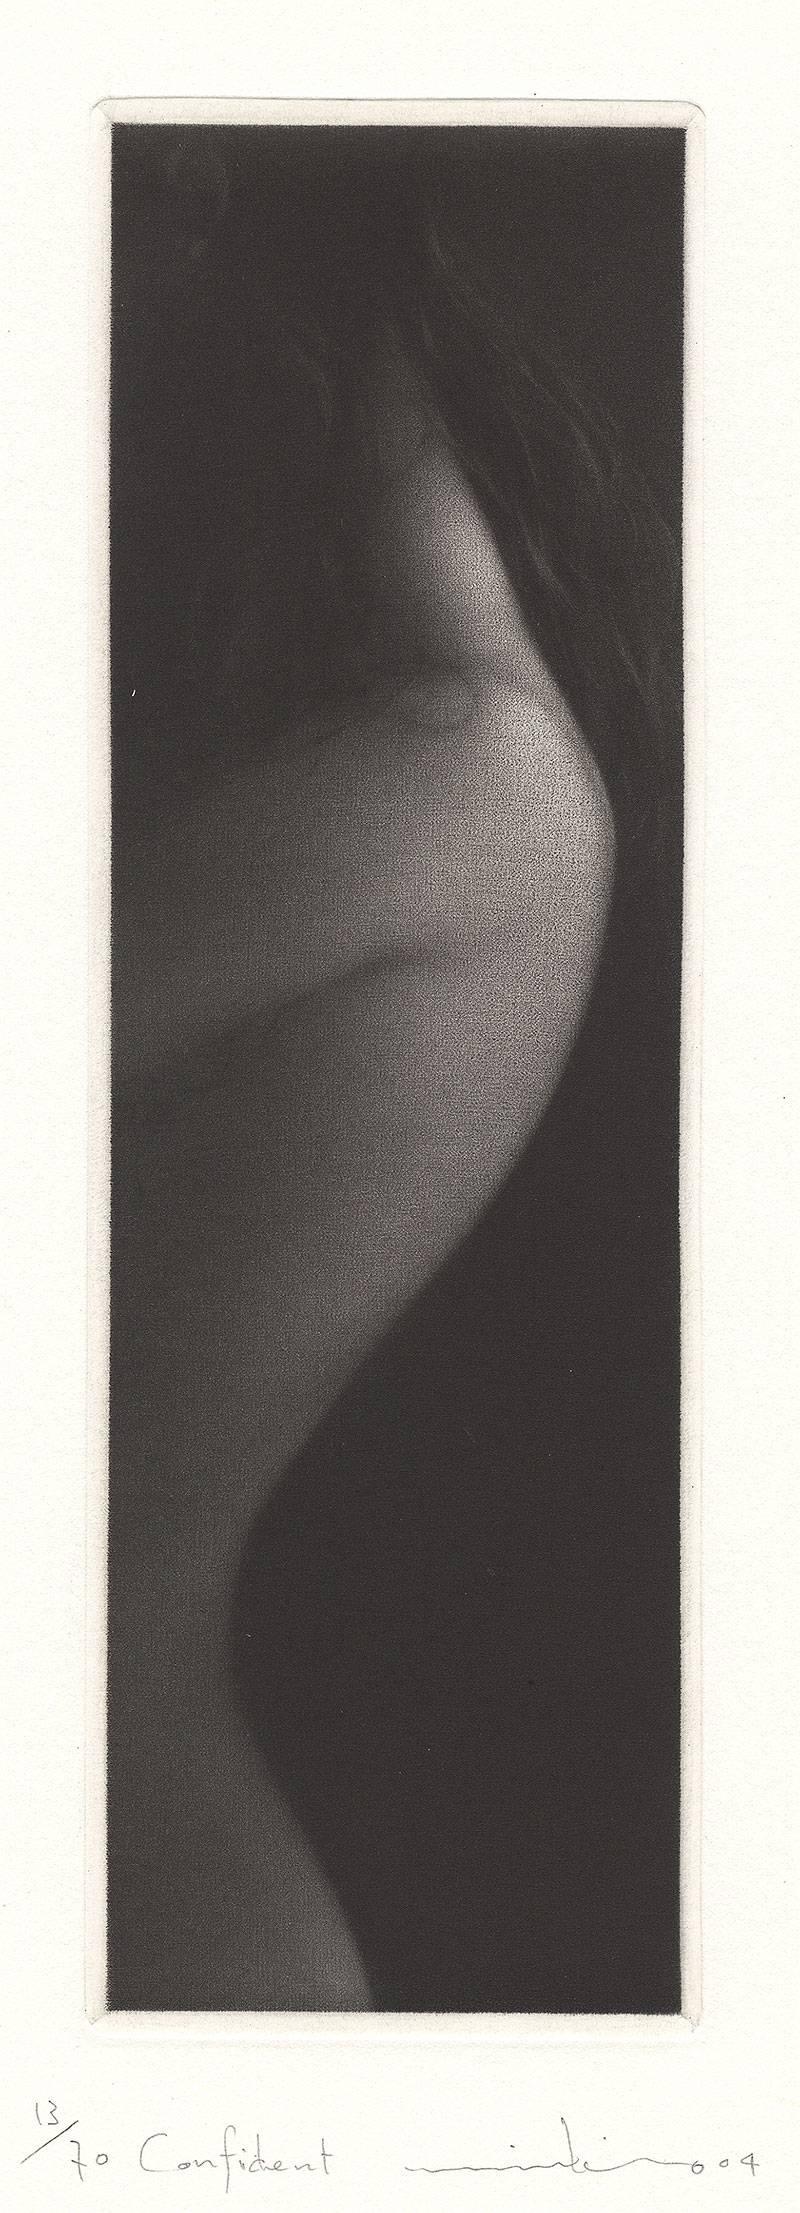 Mikio Watanabe Nude Print - Confident (profile of young nude girl both sultry and innocent at same time)